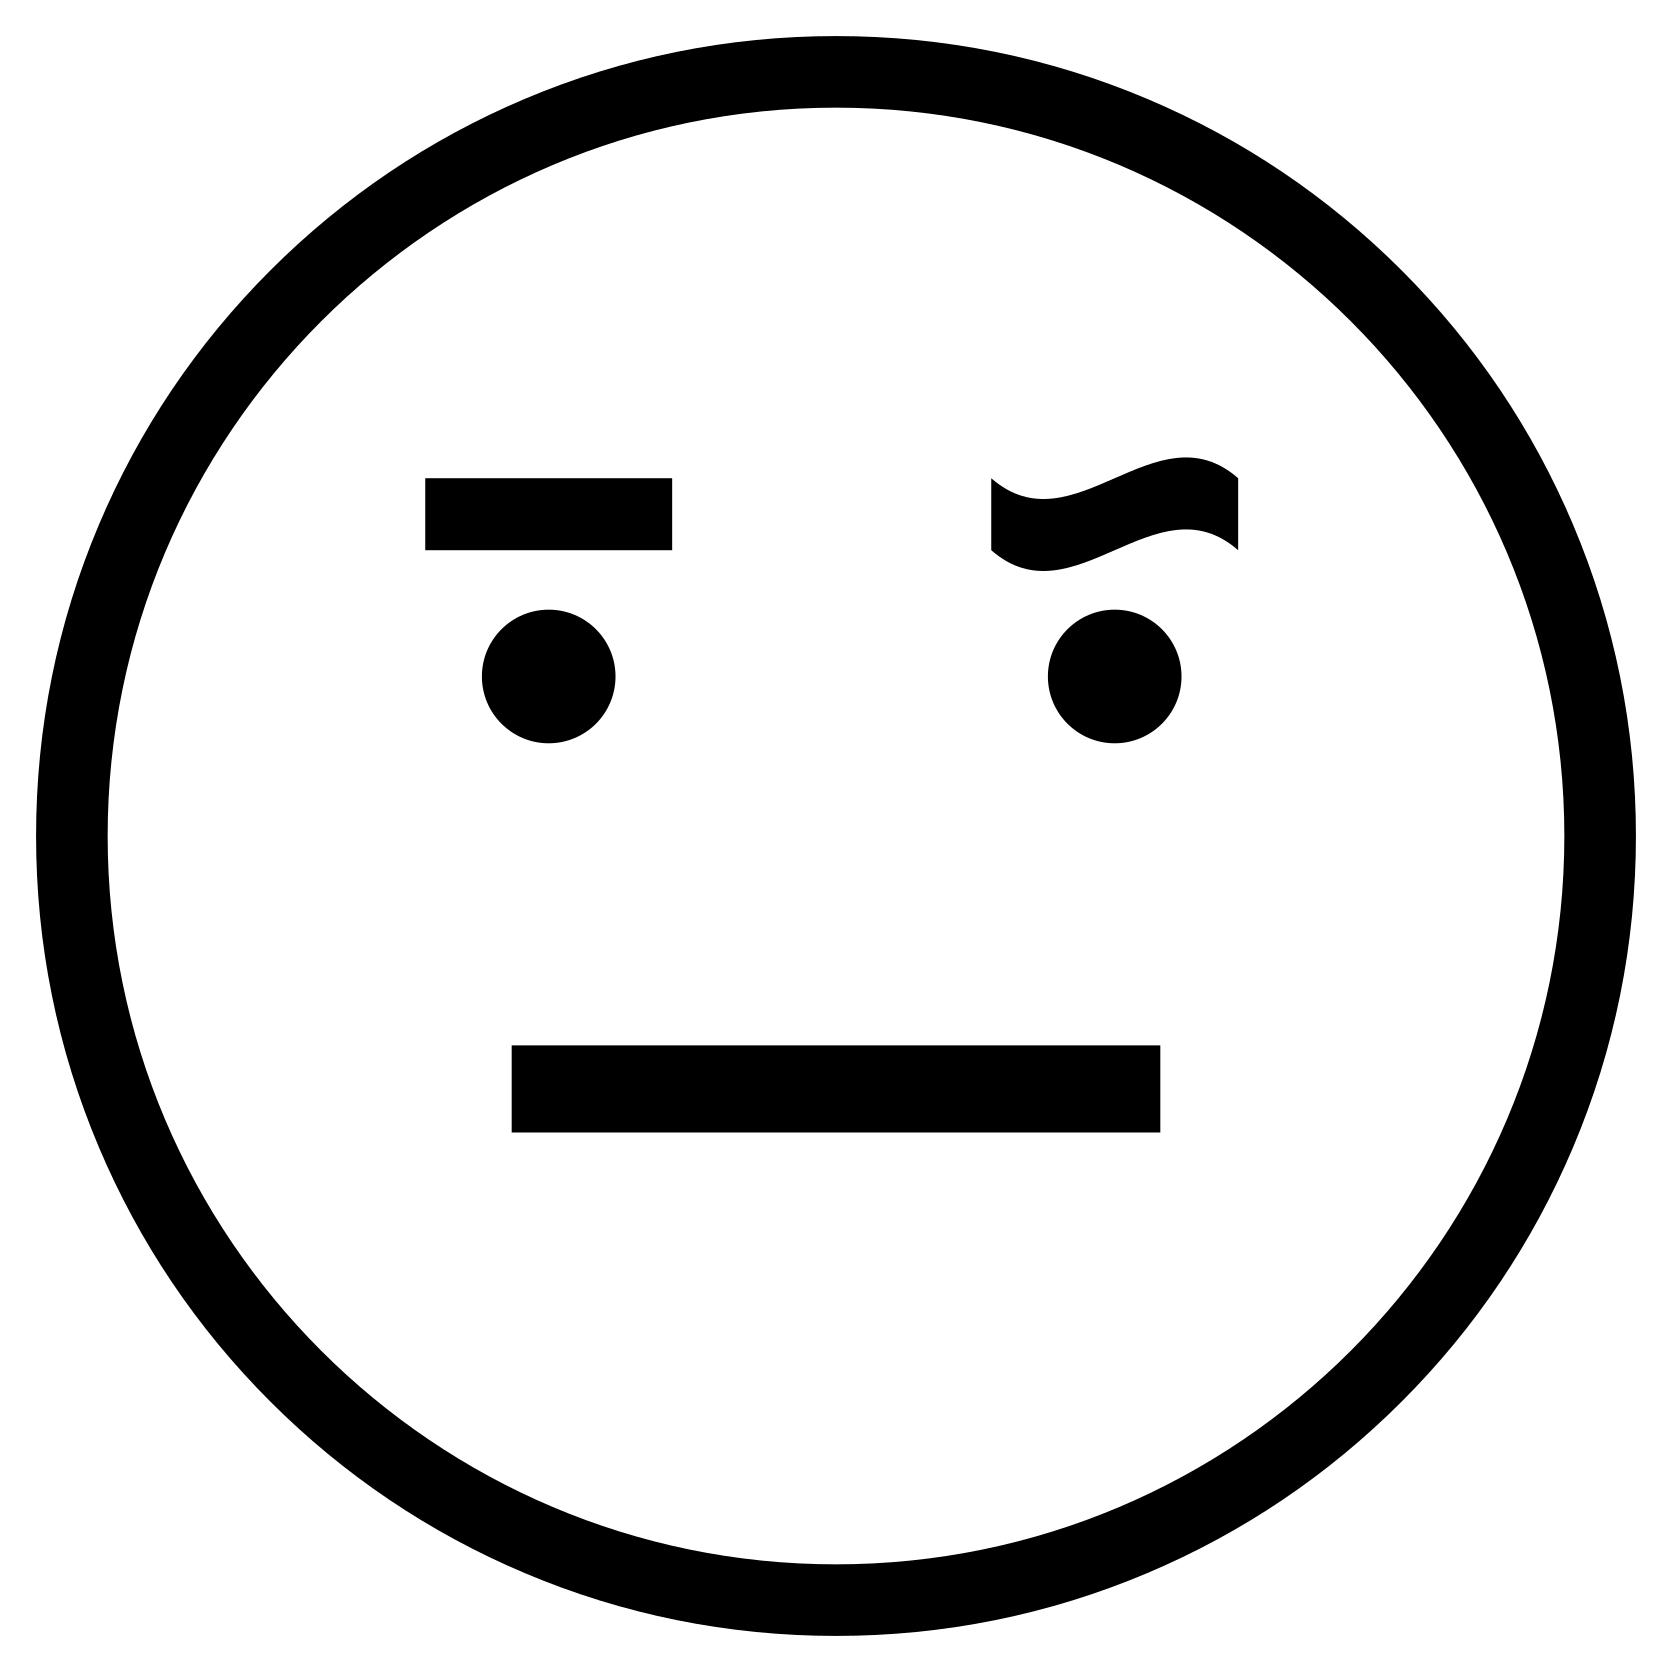 annoyed face Annoyed smiley face clipart design droide jpg.